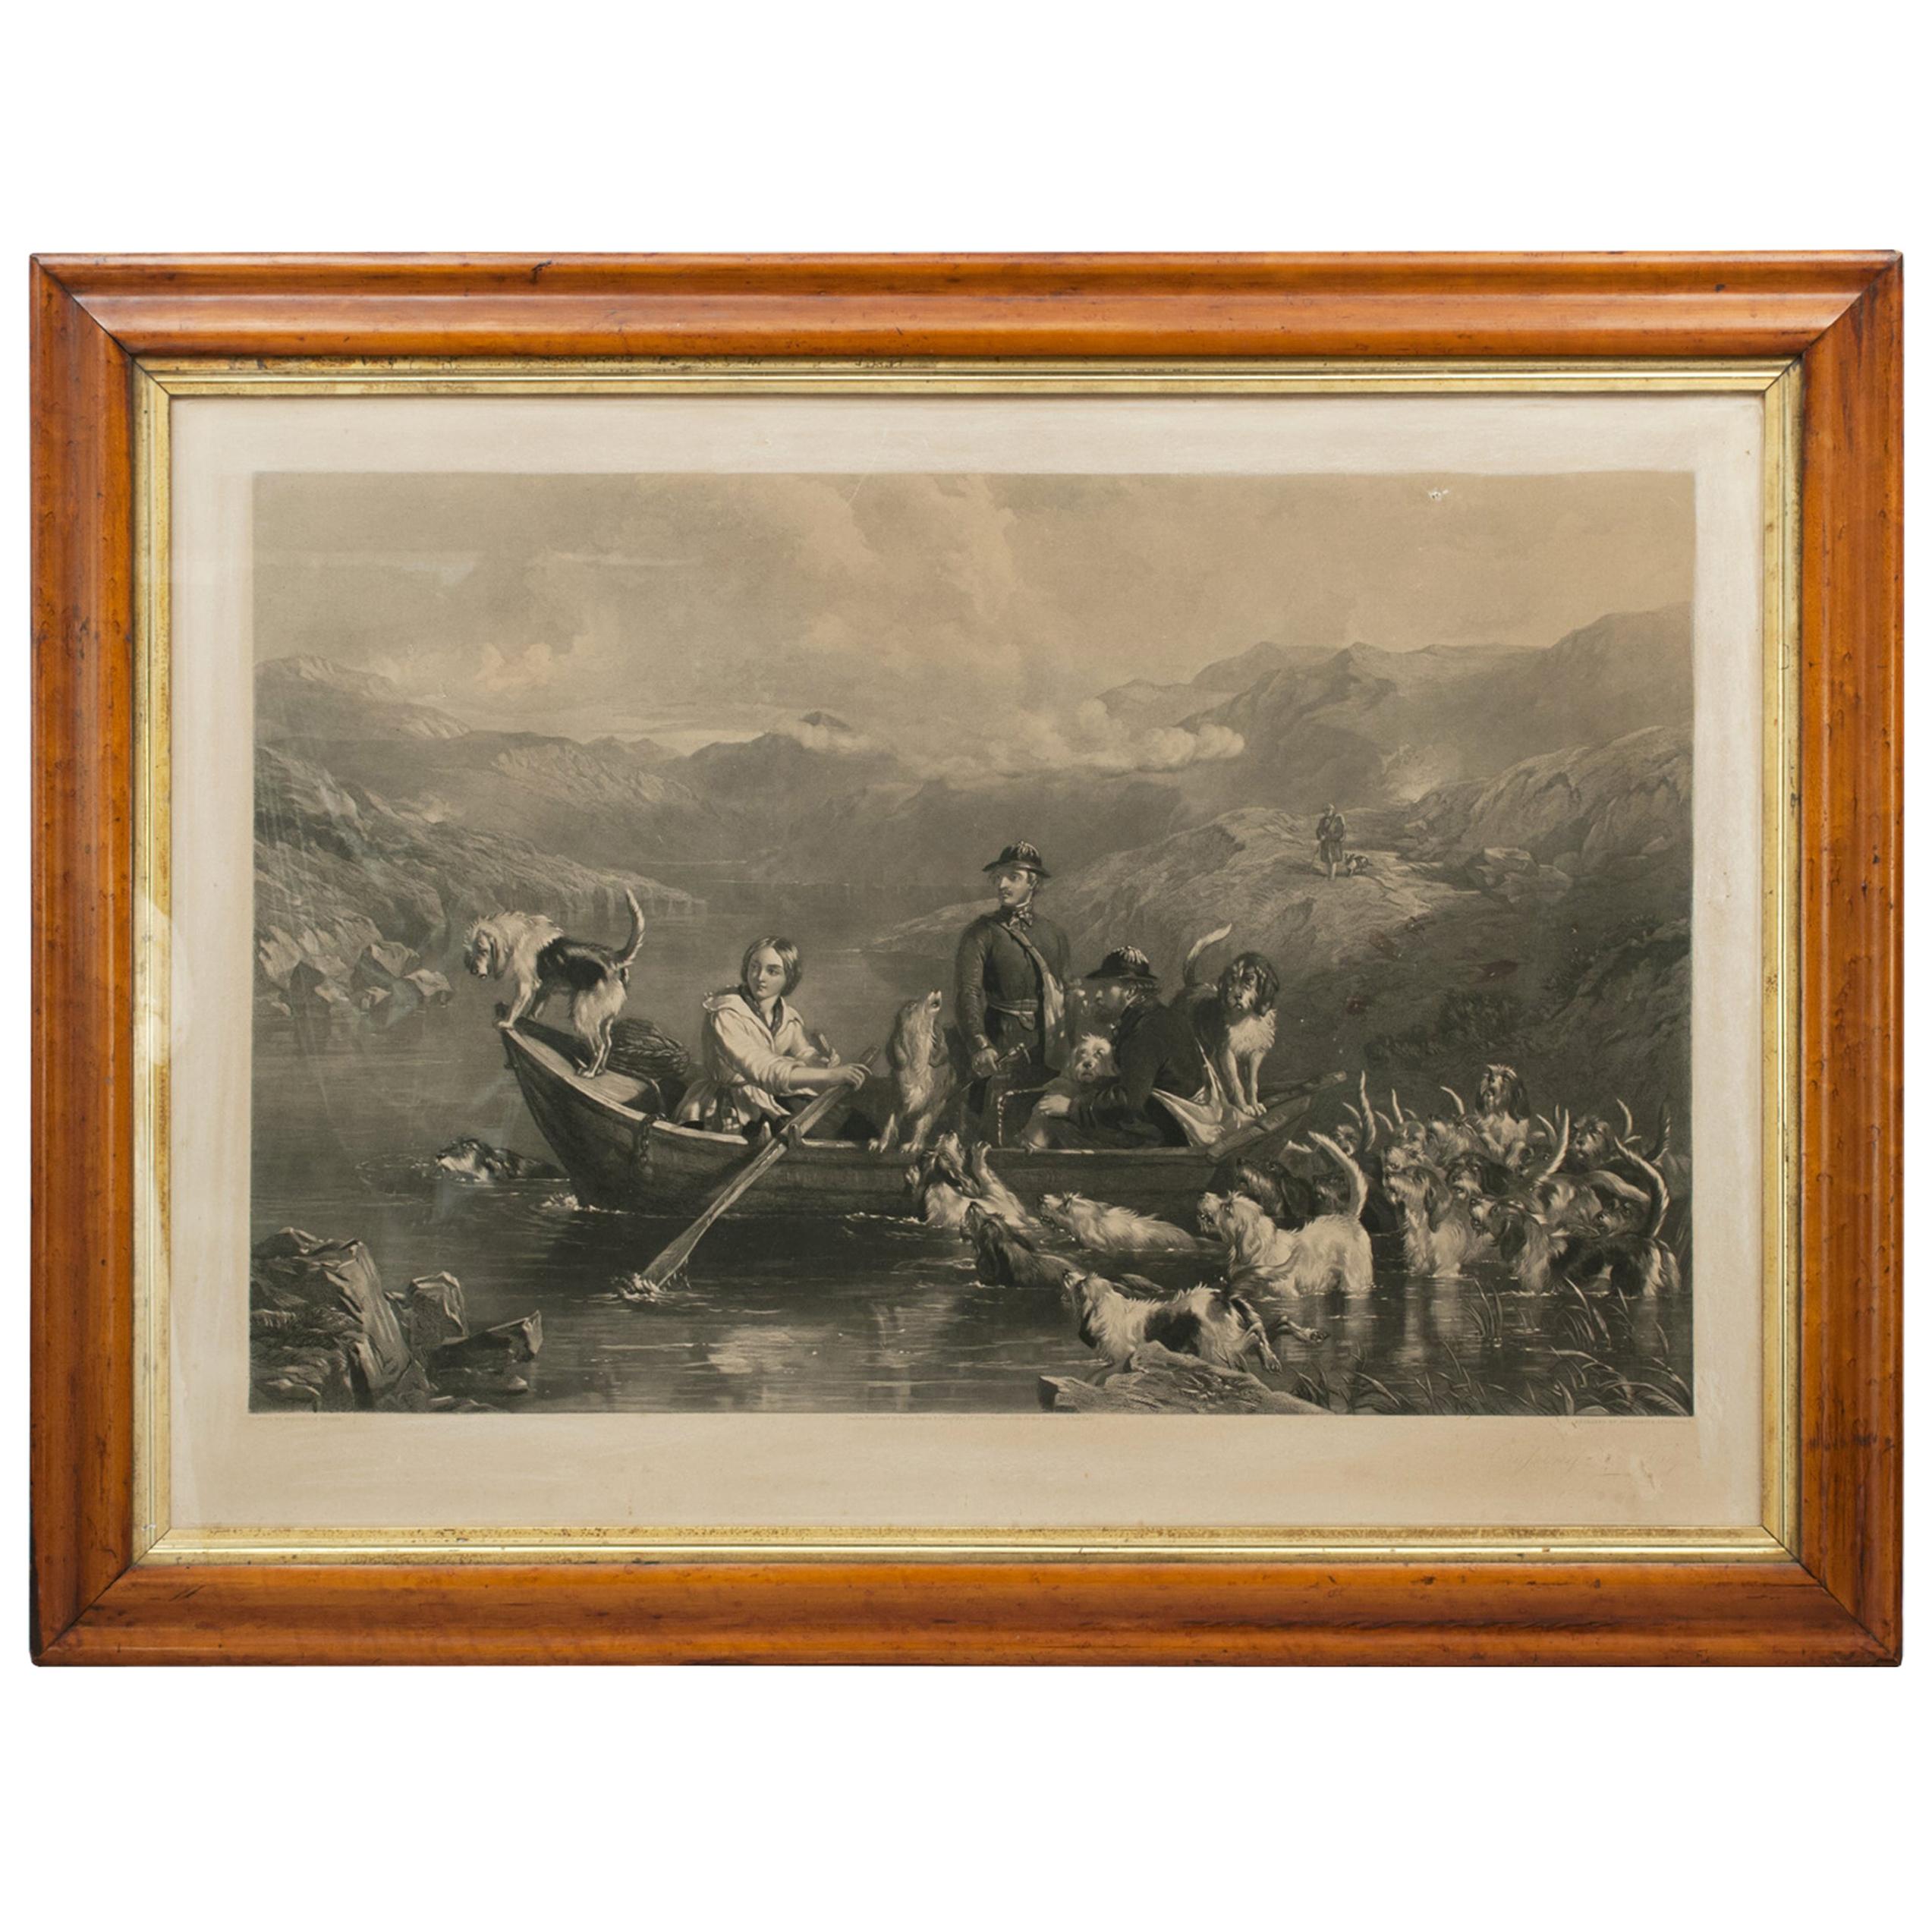 Crossing The Tay, Antique Otter Hunting Engraving, Southern Highlands